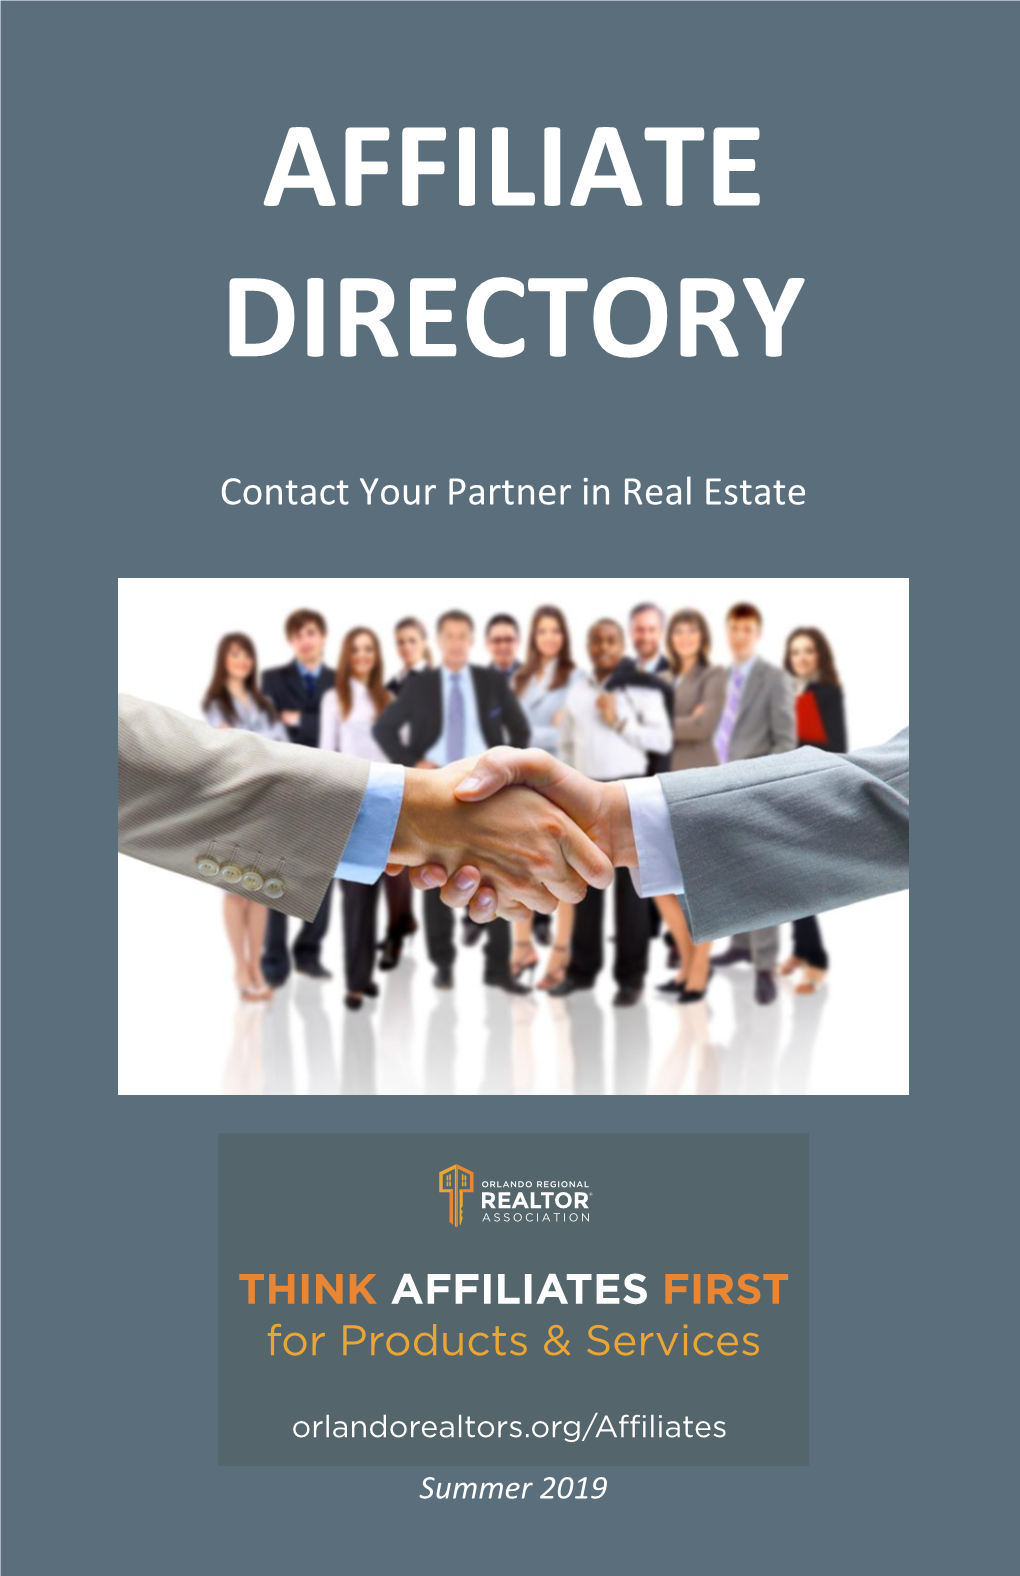 Download the Last Version of the Affiliate Directory